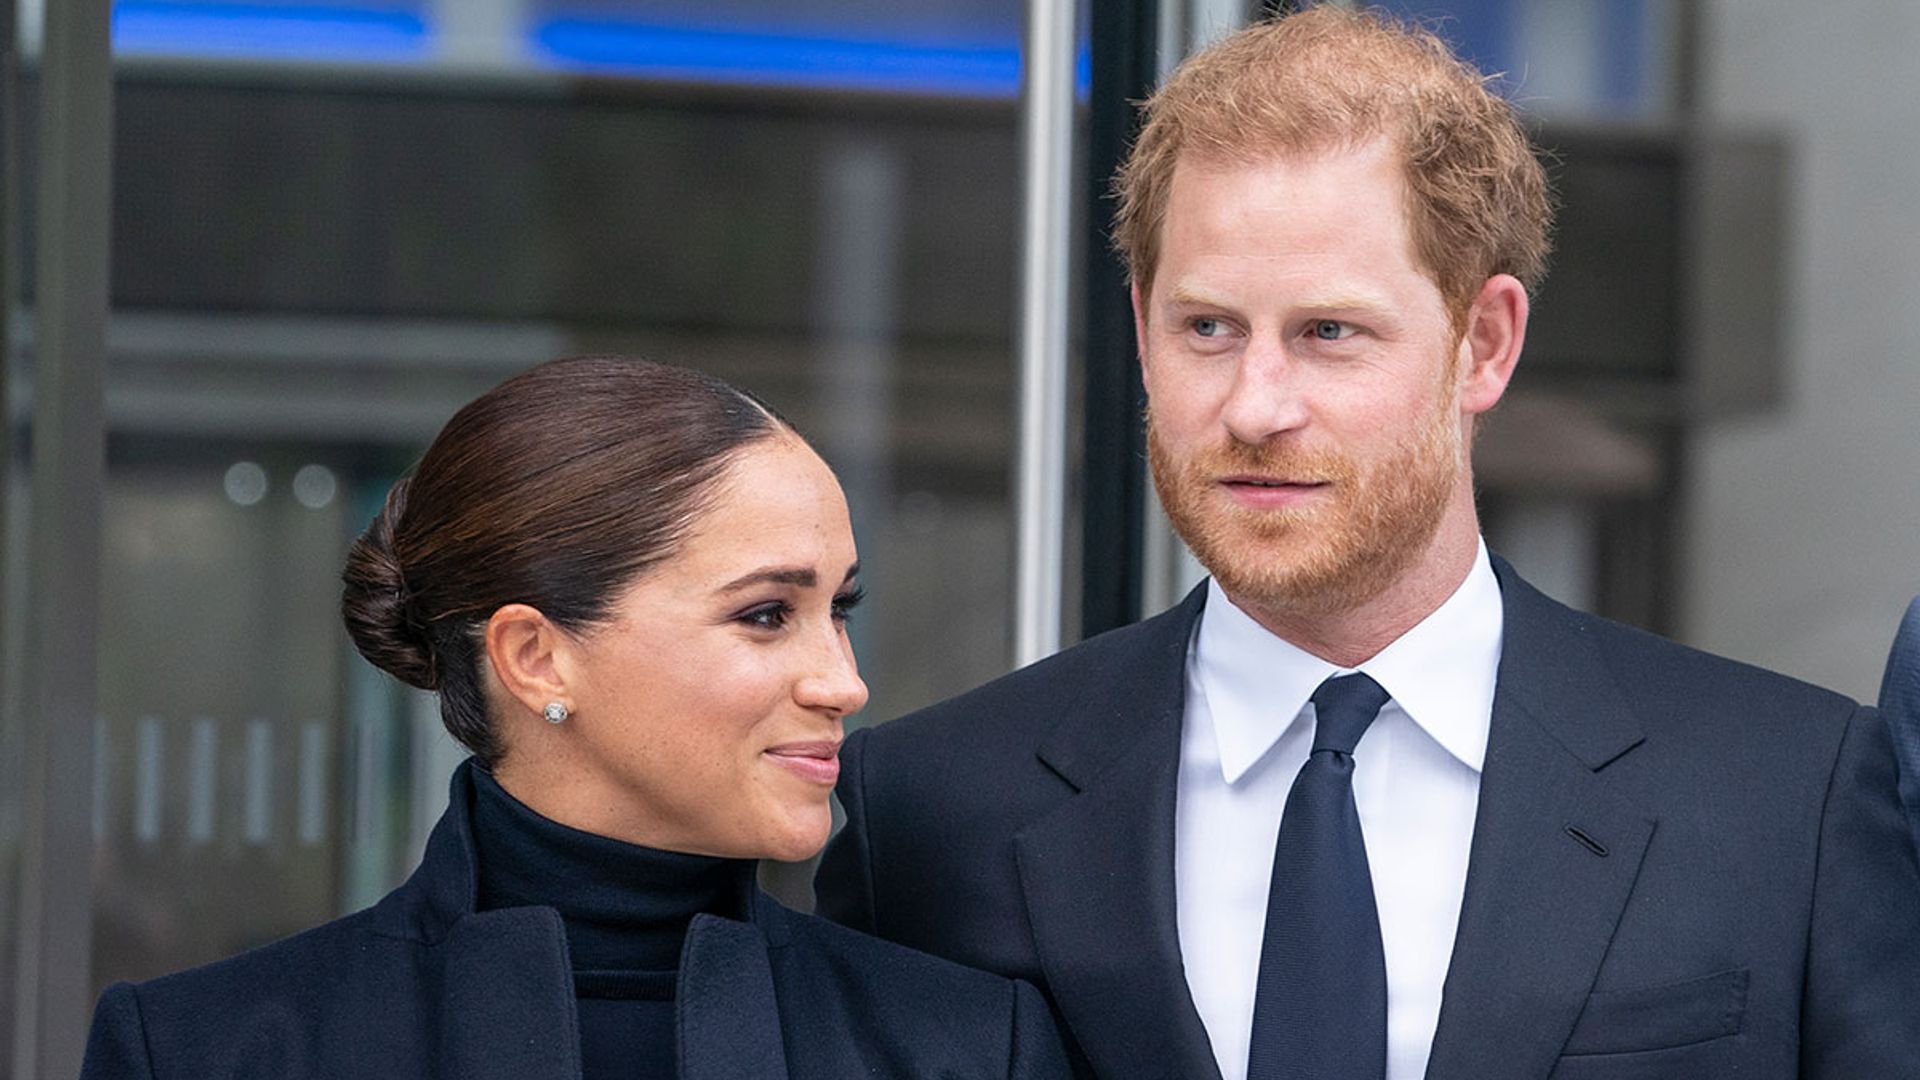 Meghan Markle's daughter Lilibet is six months old - will Sussexes share first photo?